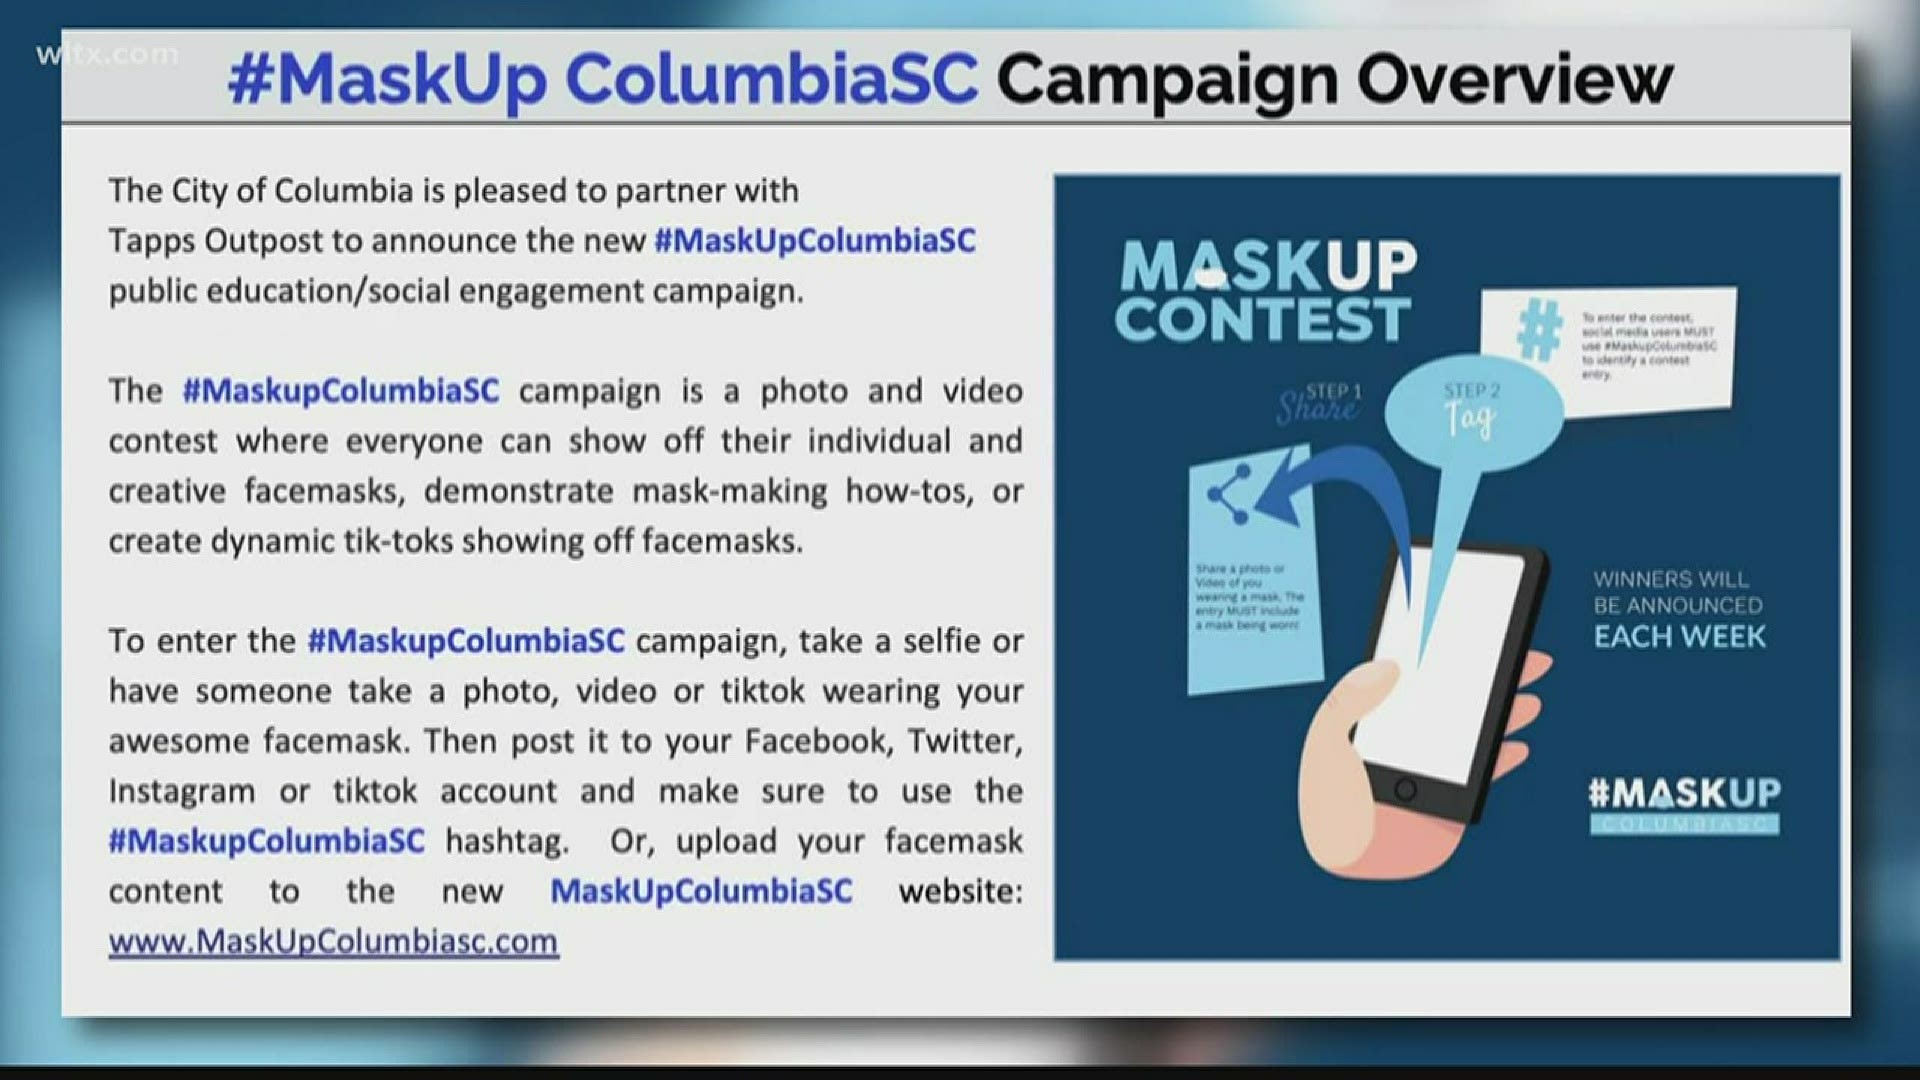 Columbia Mayor Steve Benjamin launched the Mask Up Columbia SC challenge to increase mask use.